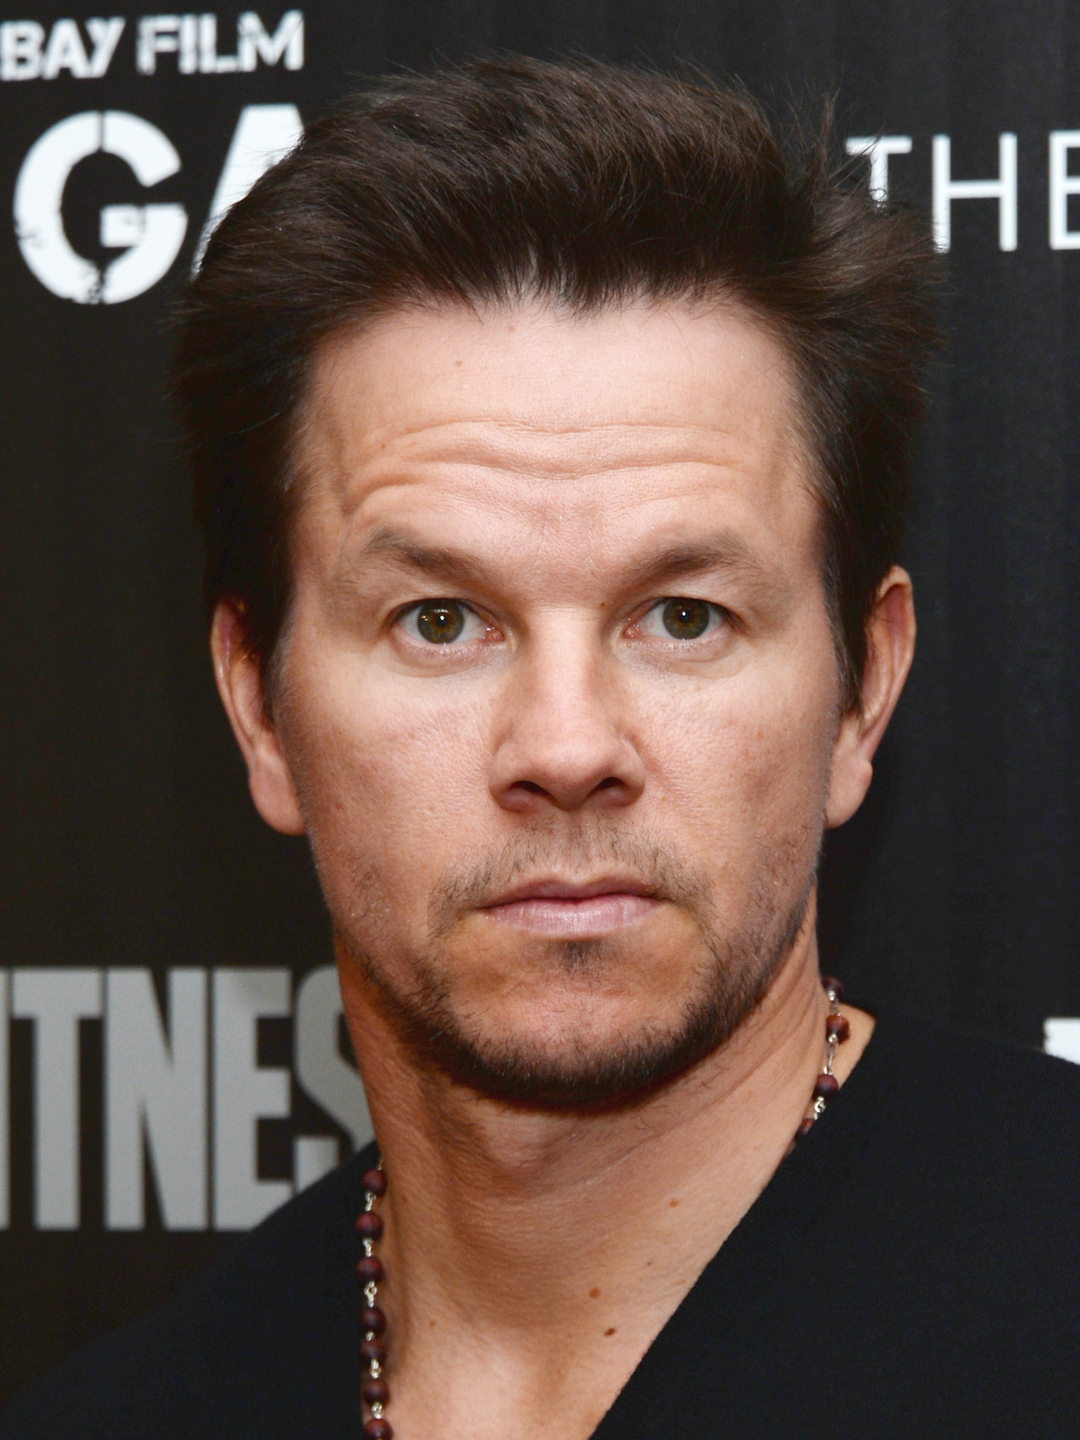 Mark Wahlberg way to fame